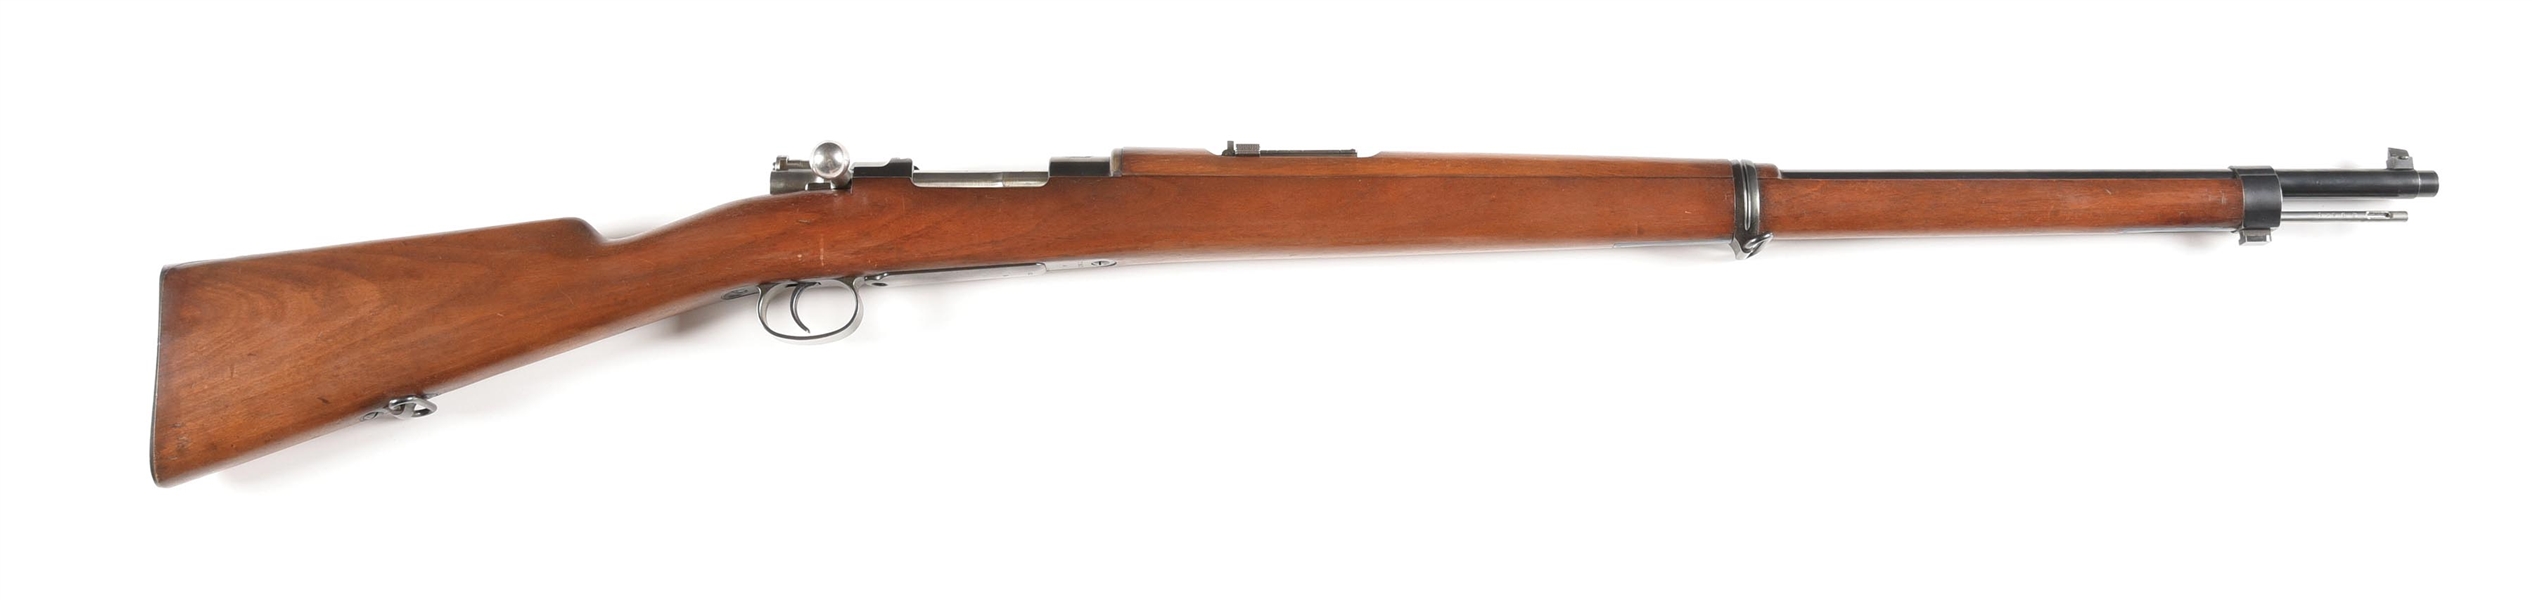 (A) VERY FINE LOEWE CHILEAN CONTRACT MODEL 1895 MAUSER BOLT ACTION RIFLE.